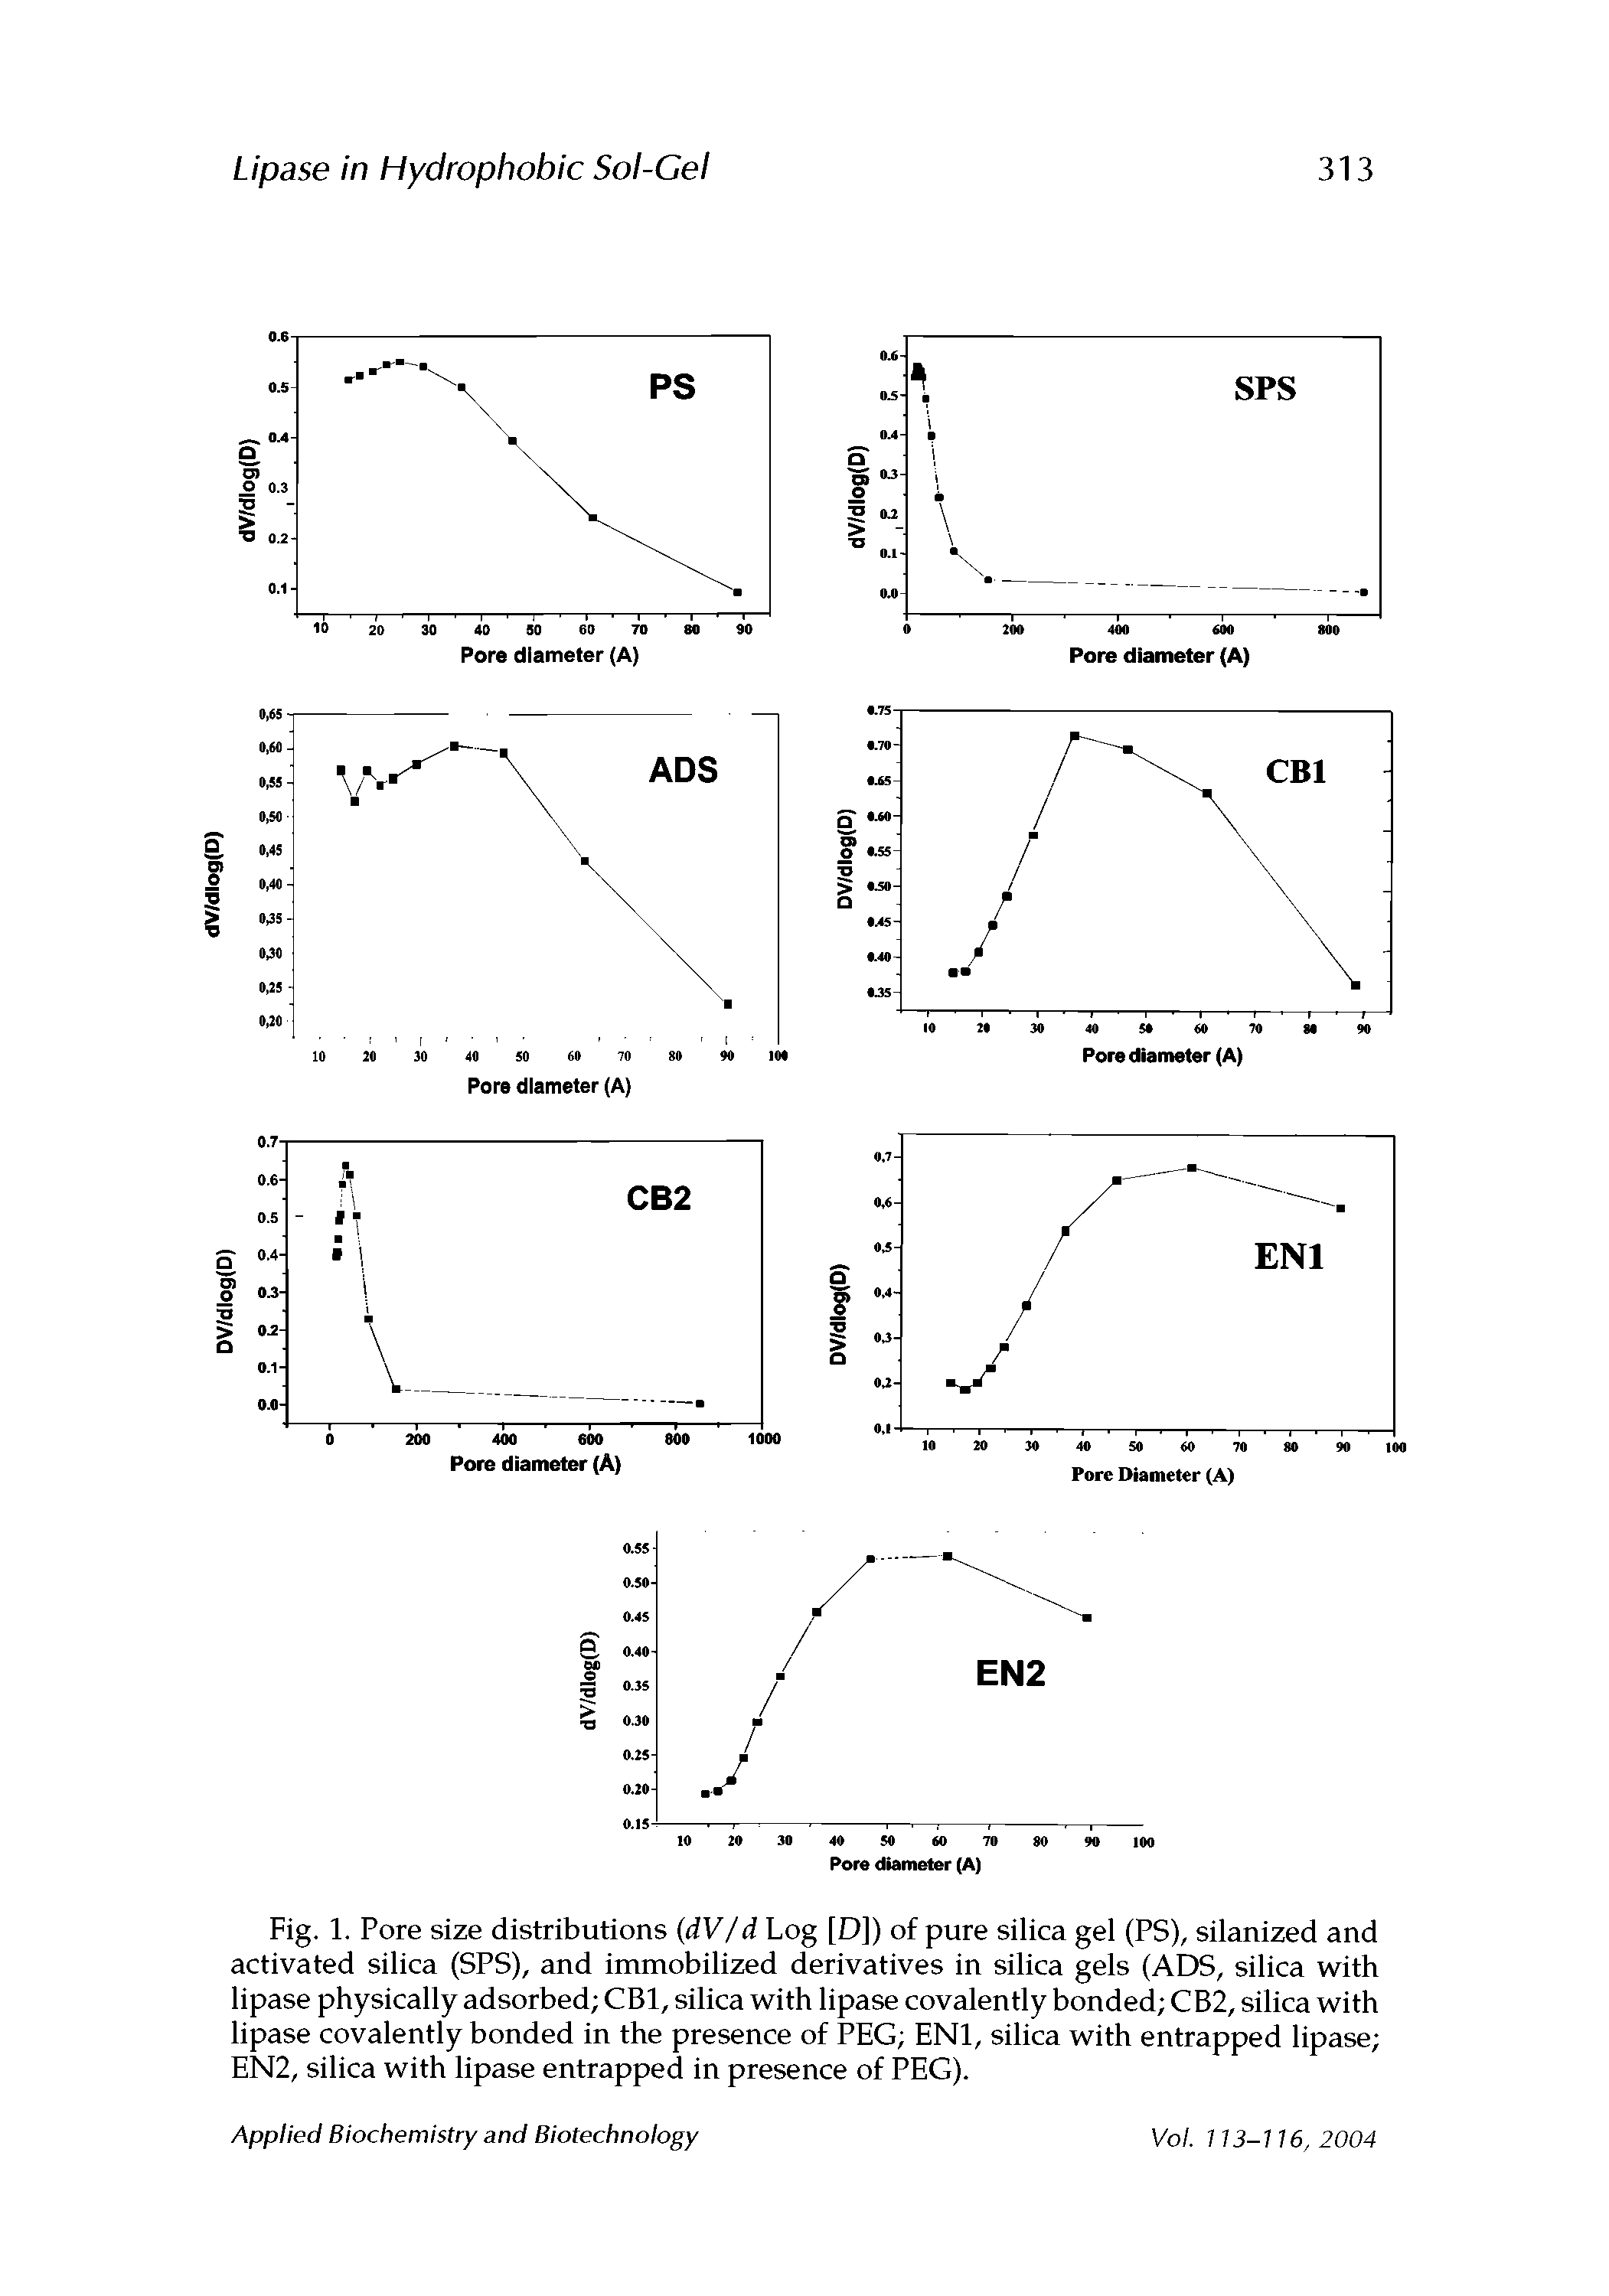 Fig. 1. Pore size distributions (dV/d Log [D]) of pure silica gel (PS), silanized and activated silica (SPS), and immobilized derivatives in silica gels (ADS, silica with lipase physically adsorbed CB1, silica with lipase covalently bonded CB2, silica with lipase covalently bonded in the presence of PEG EN1, silica with entrapped lipase EN2, silica with lipase entrapped in presence of PEG).